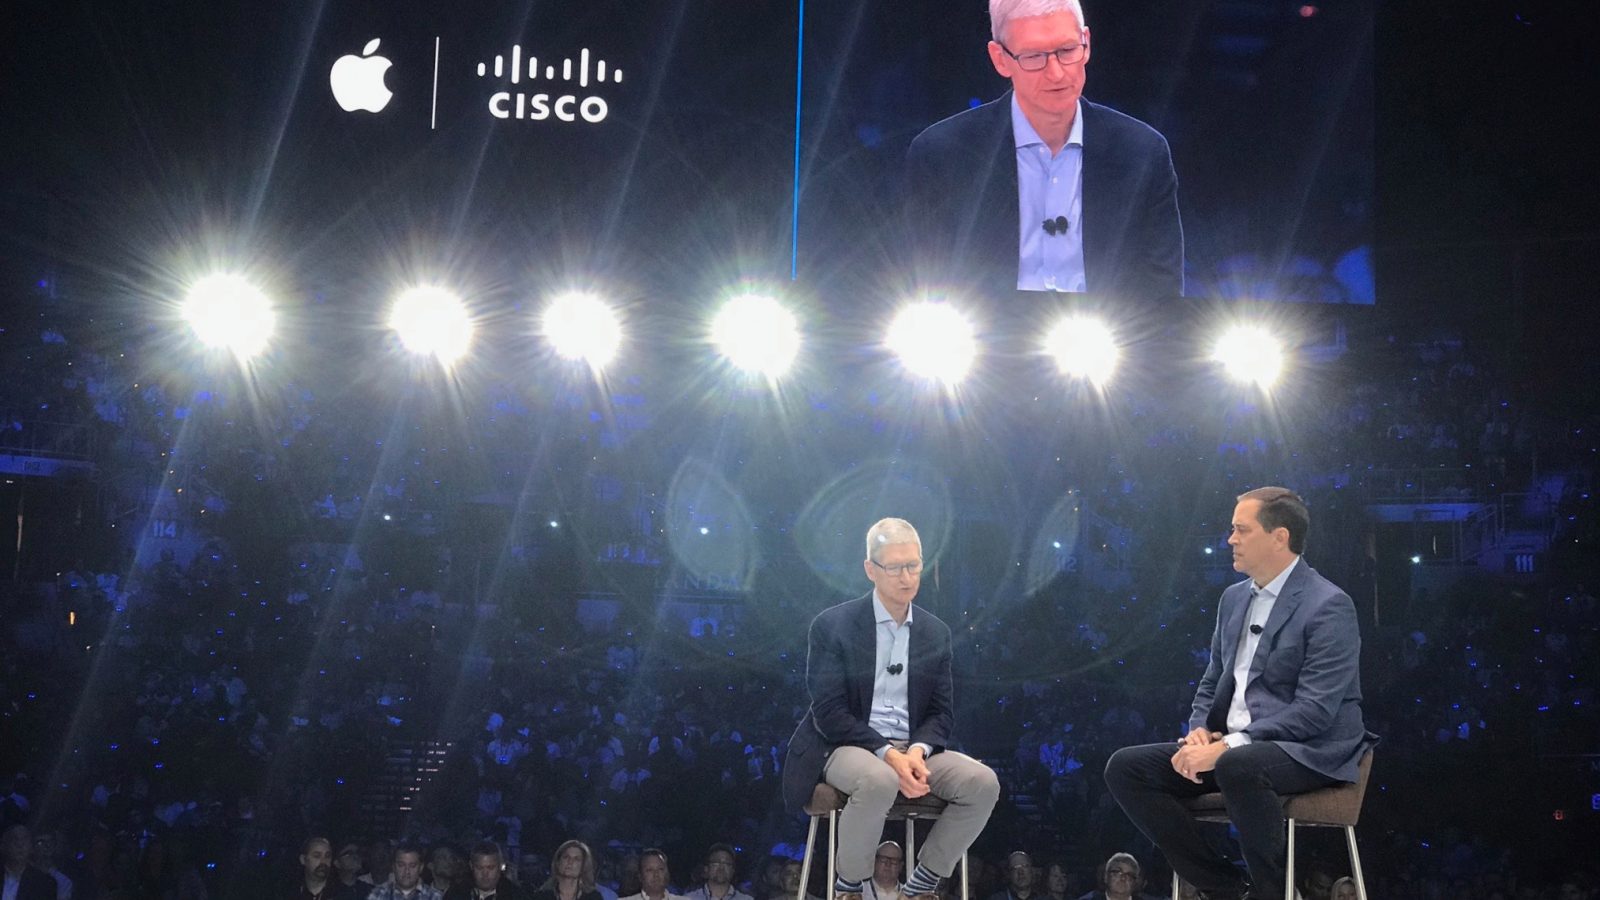 Apple and Cisco want to offer corporate security discount to their customers